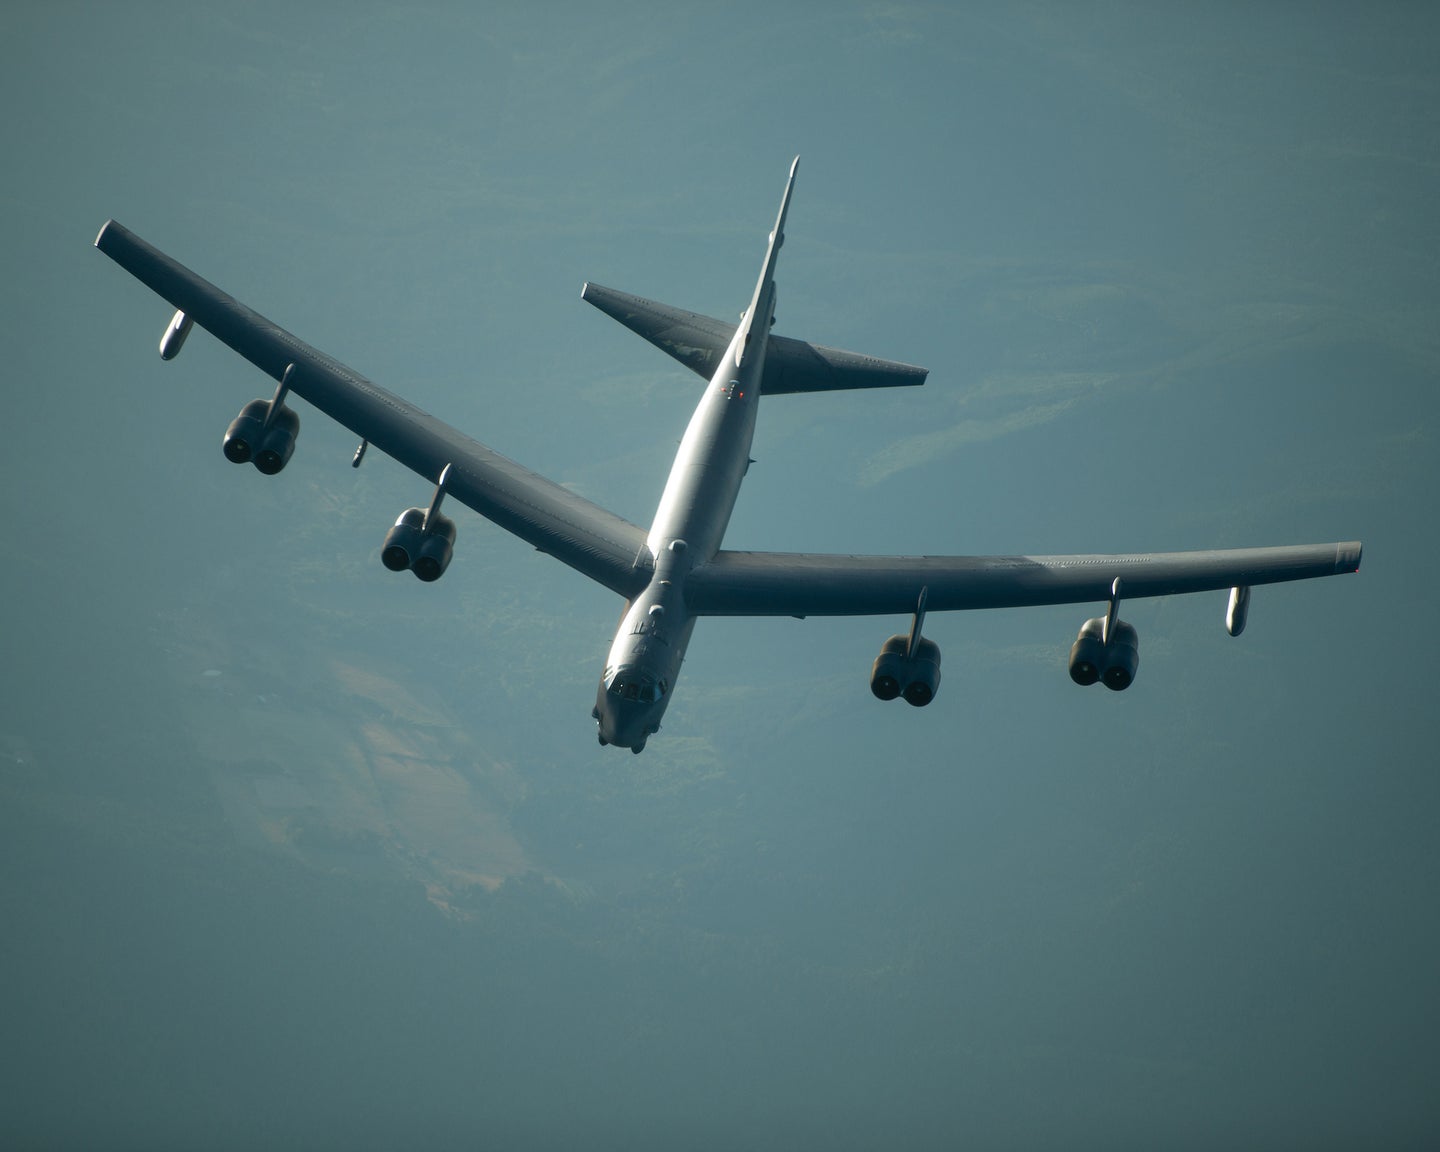 A B-52 bomber in 2017 taking part in a refueling exercise. In a 2022 hypersonic test, the weapon was released from a B-52.